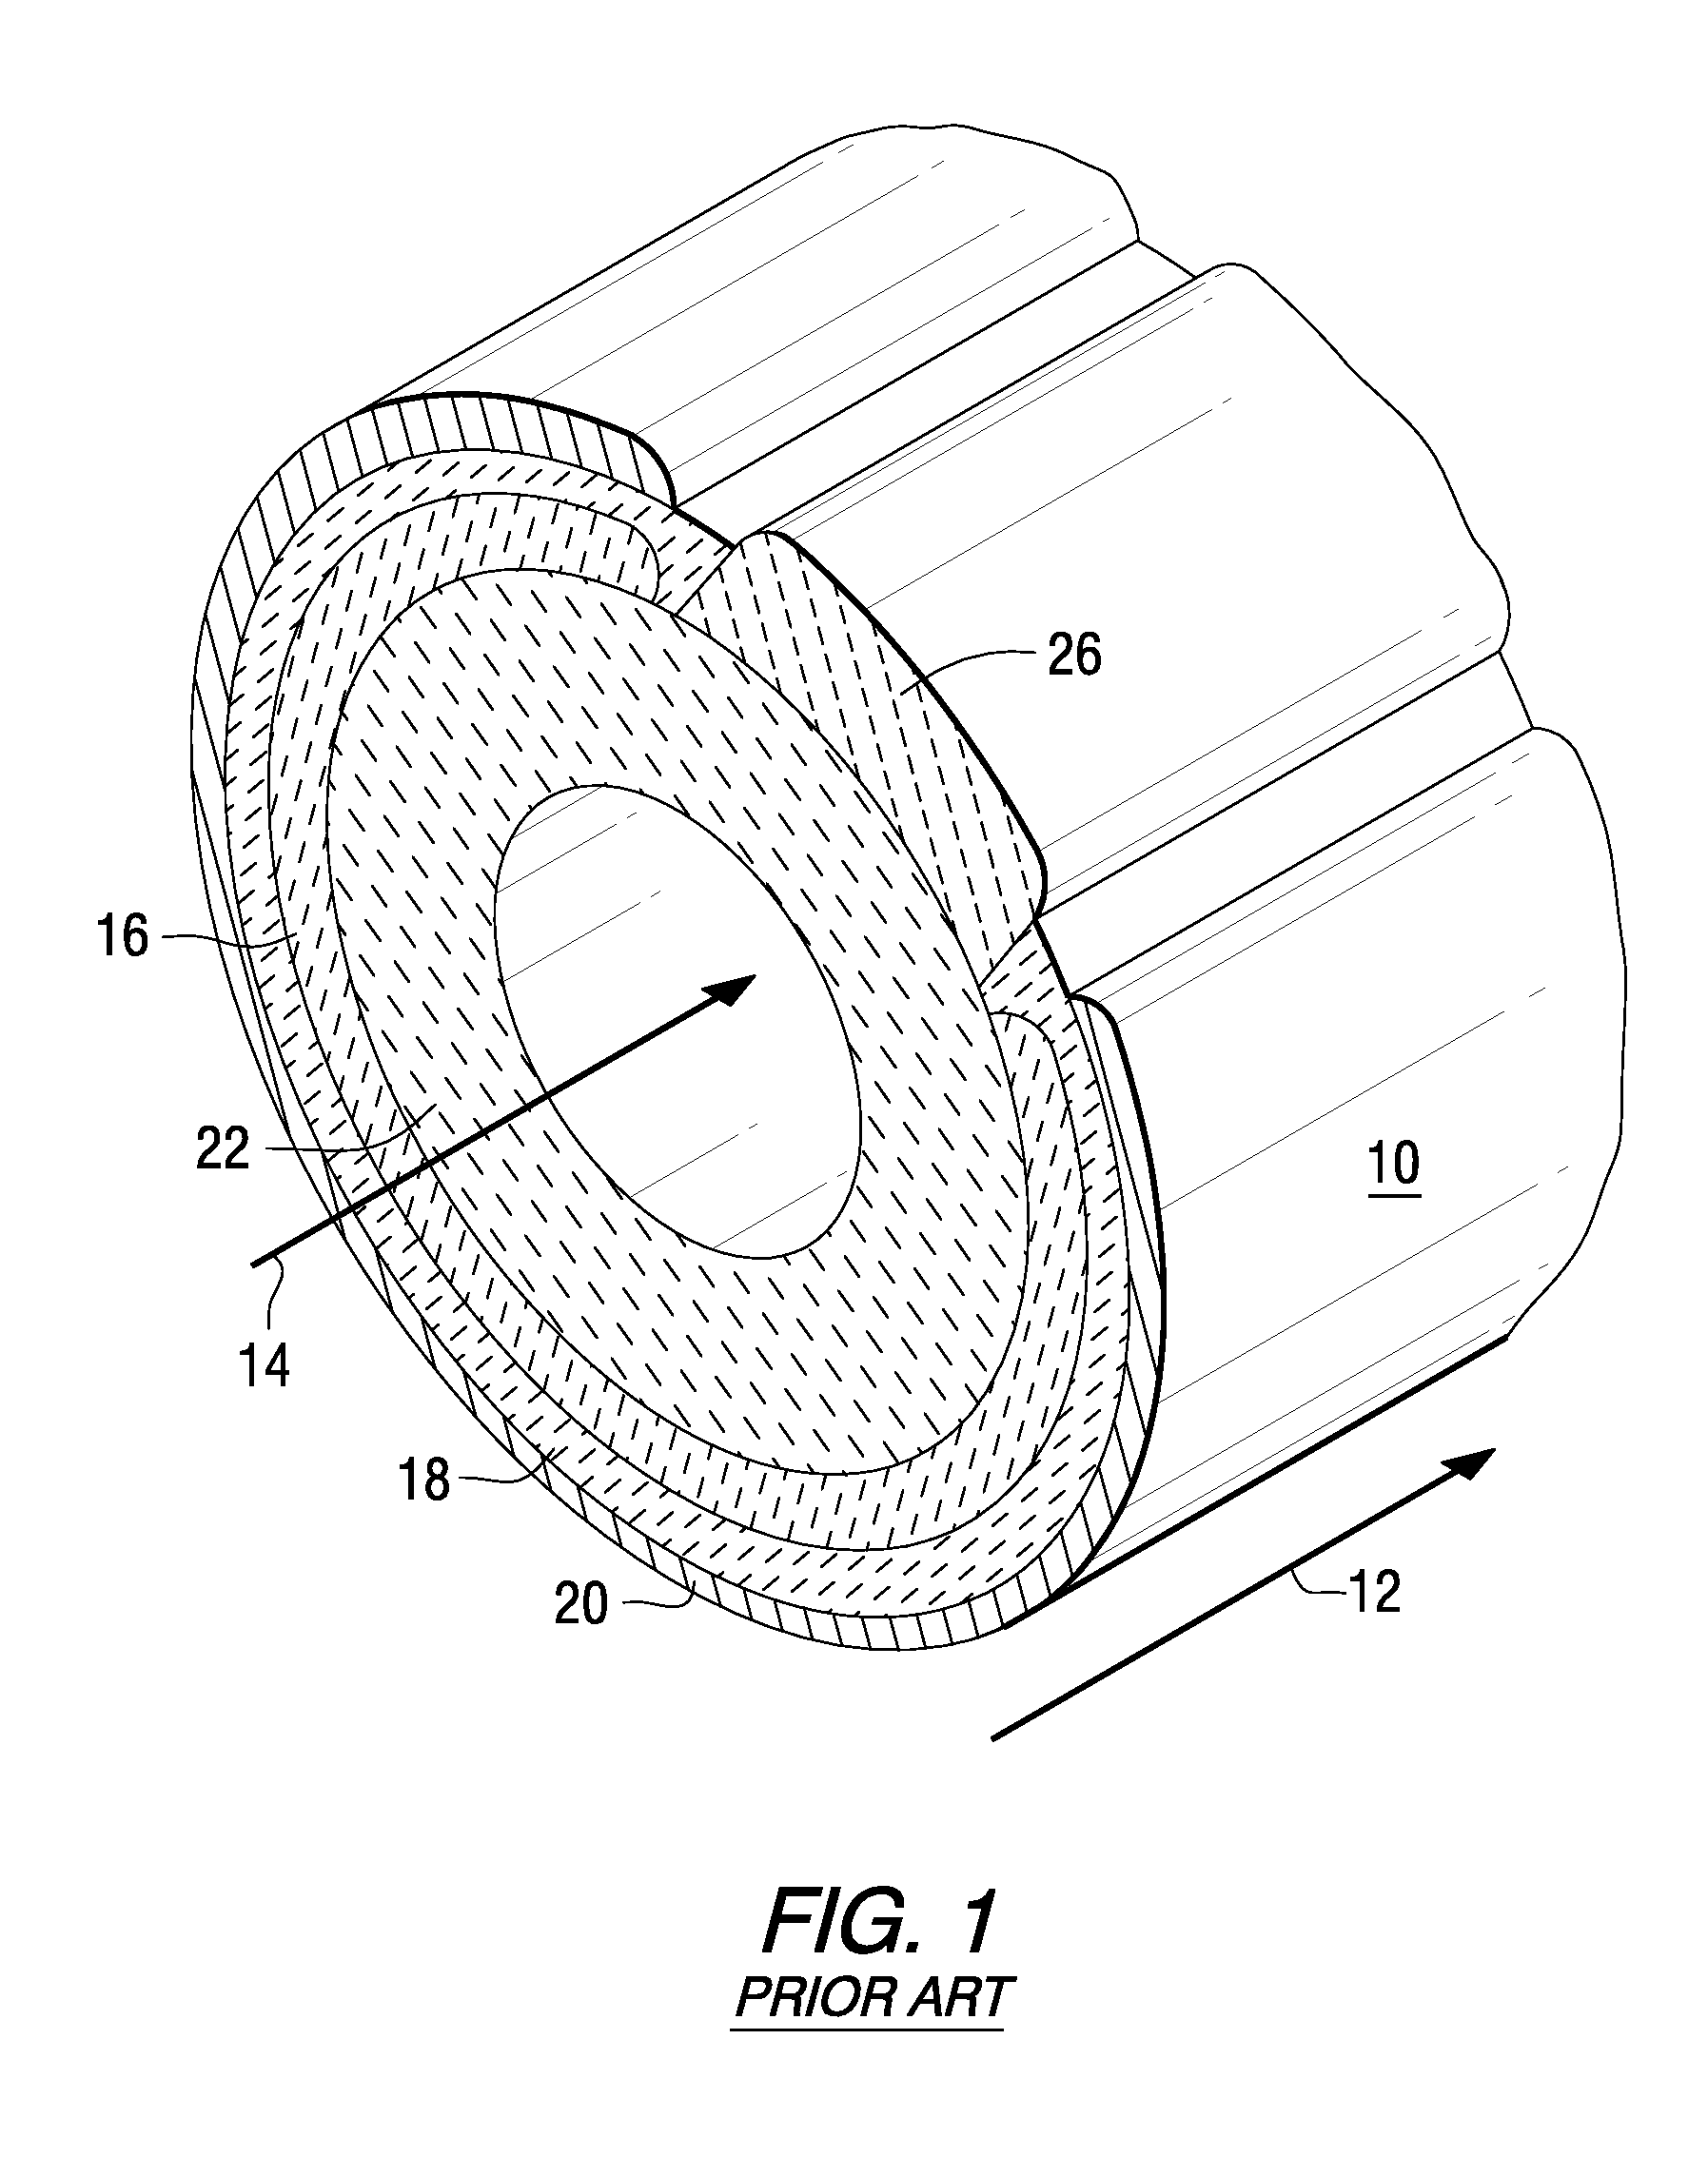 Tubular Solid Oxide Fuel Cells With Porous Metal Supports and Ceramic Interconnections